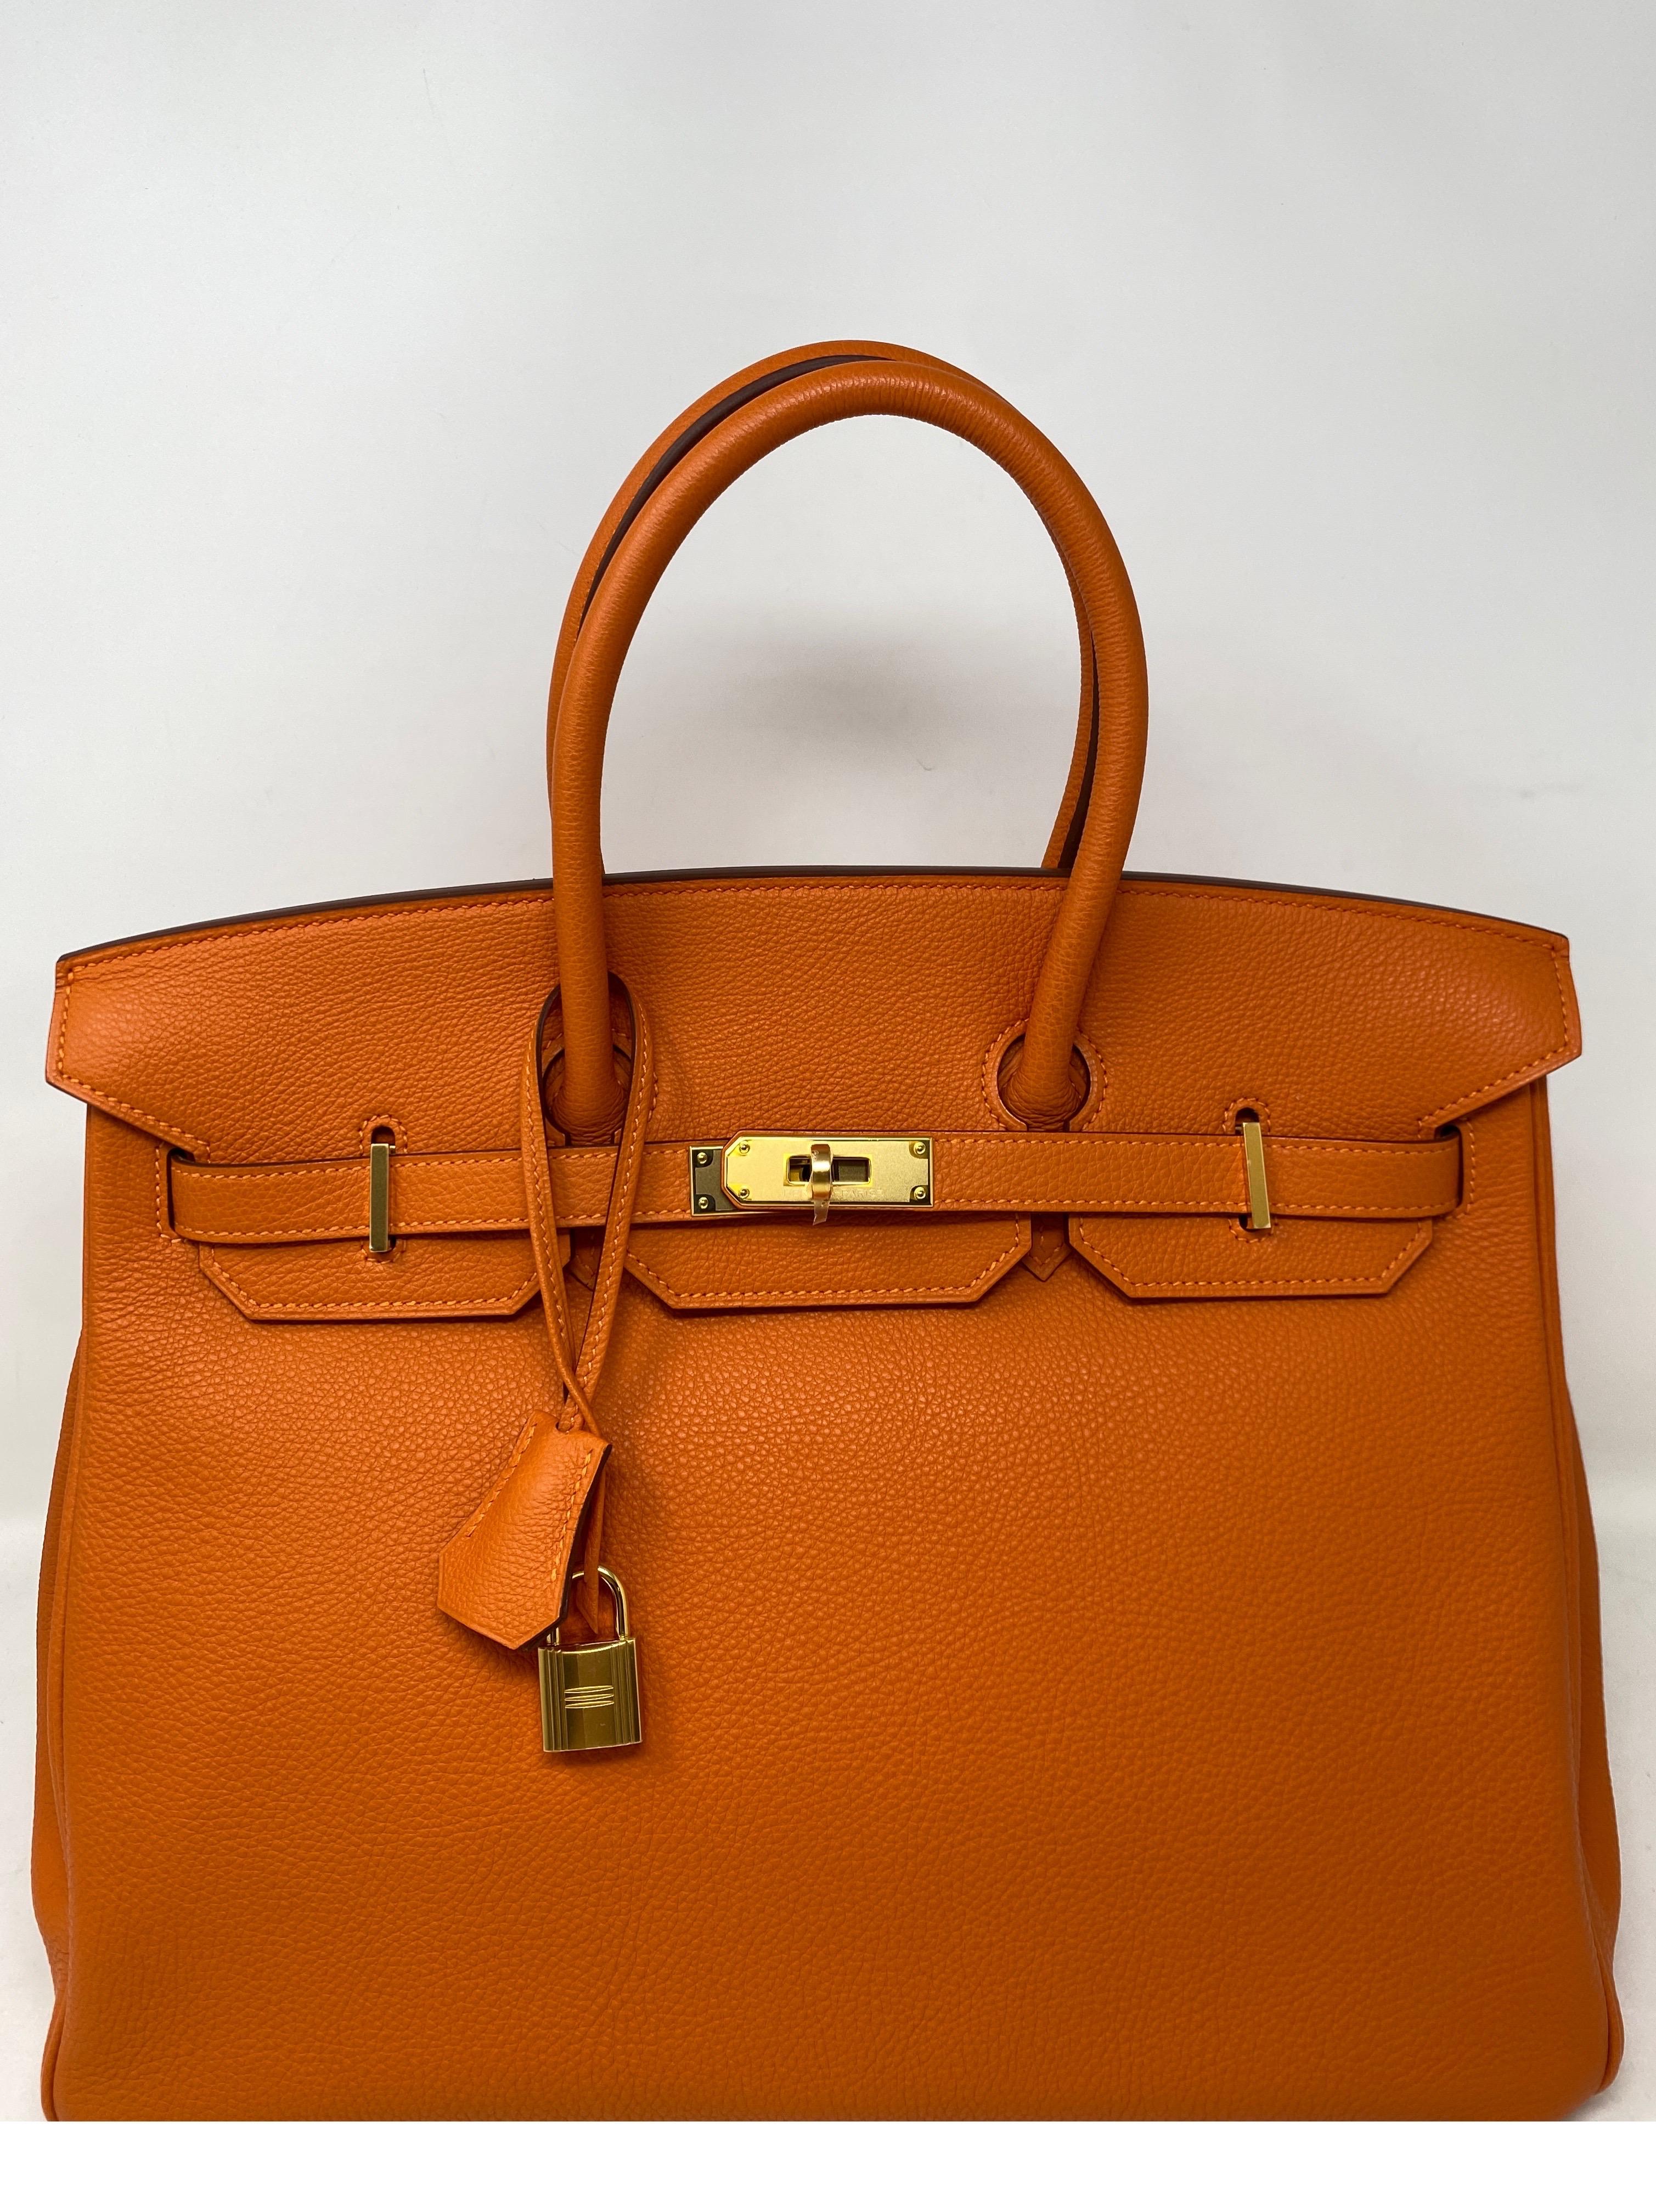 Hermes Orange Birkin 35 Bag. Most wanted combination. Classic Hermes orange togo leather with gold hardware. Excellent condition like new. Still has the plastic on the hardware. Interior pristine. Looks like it was never used. Corners show no wear.